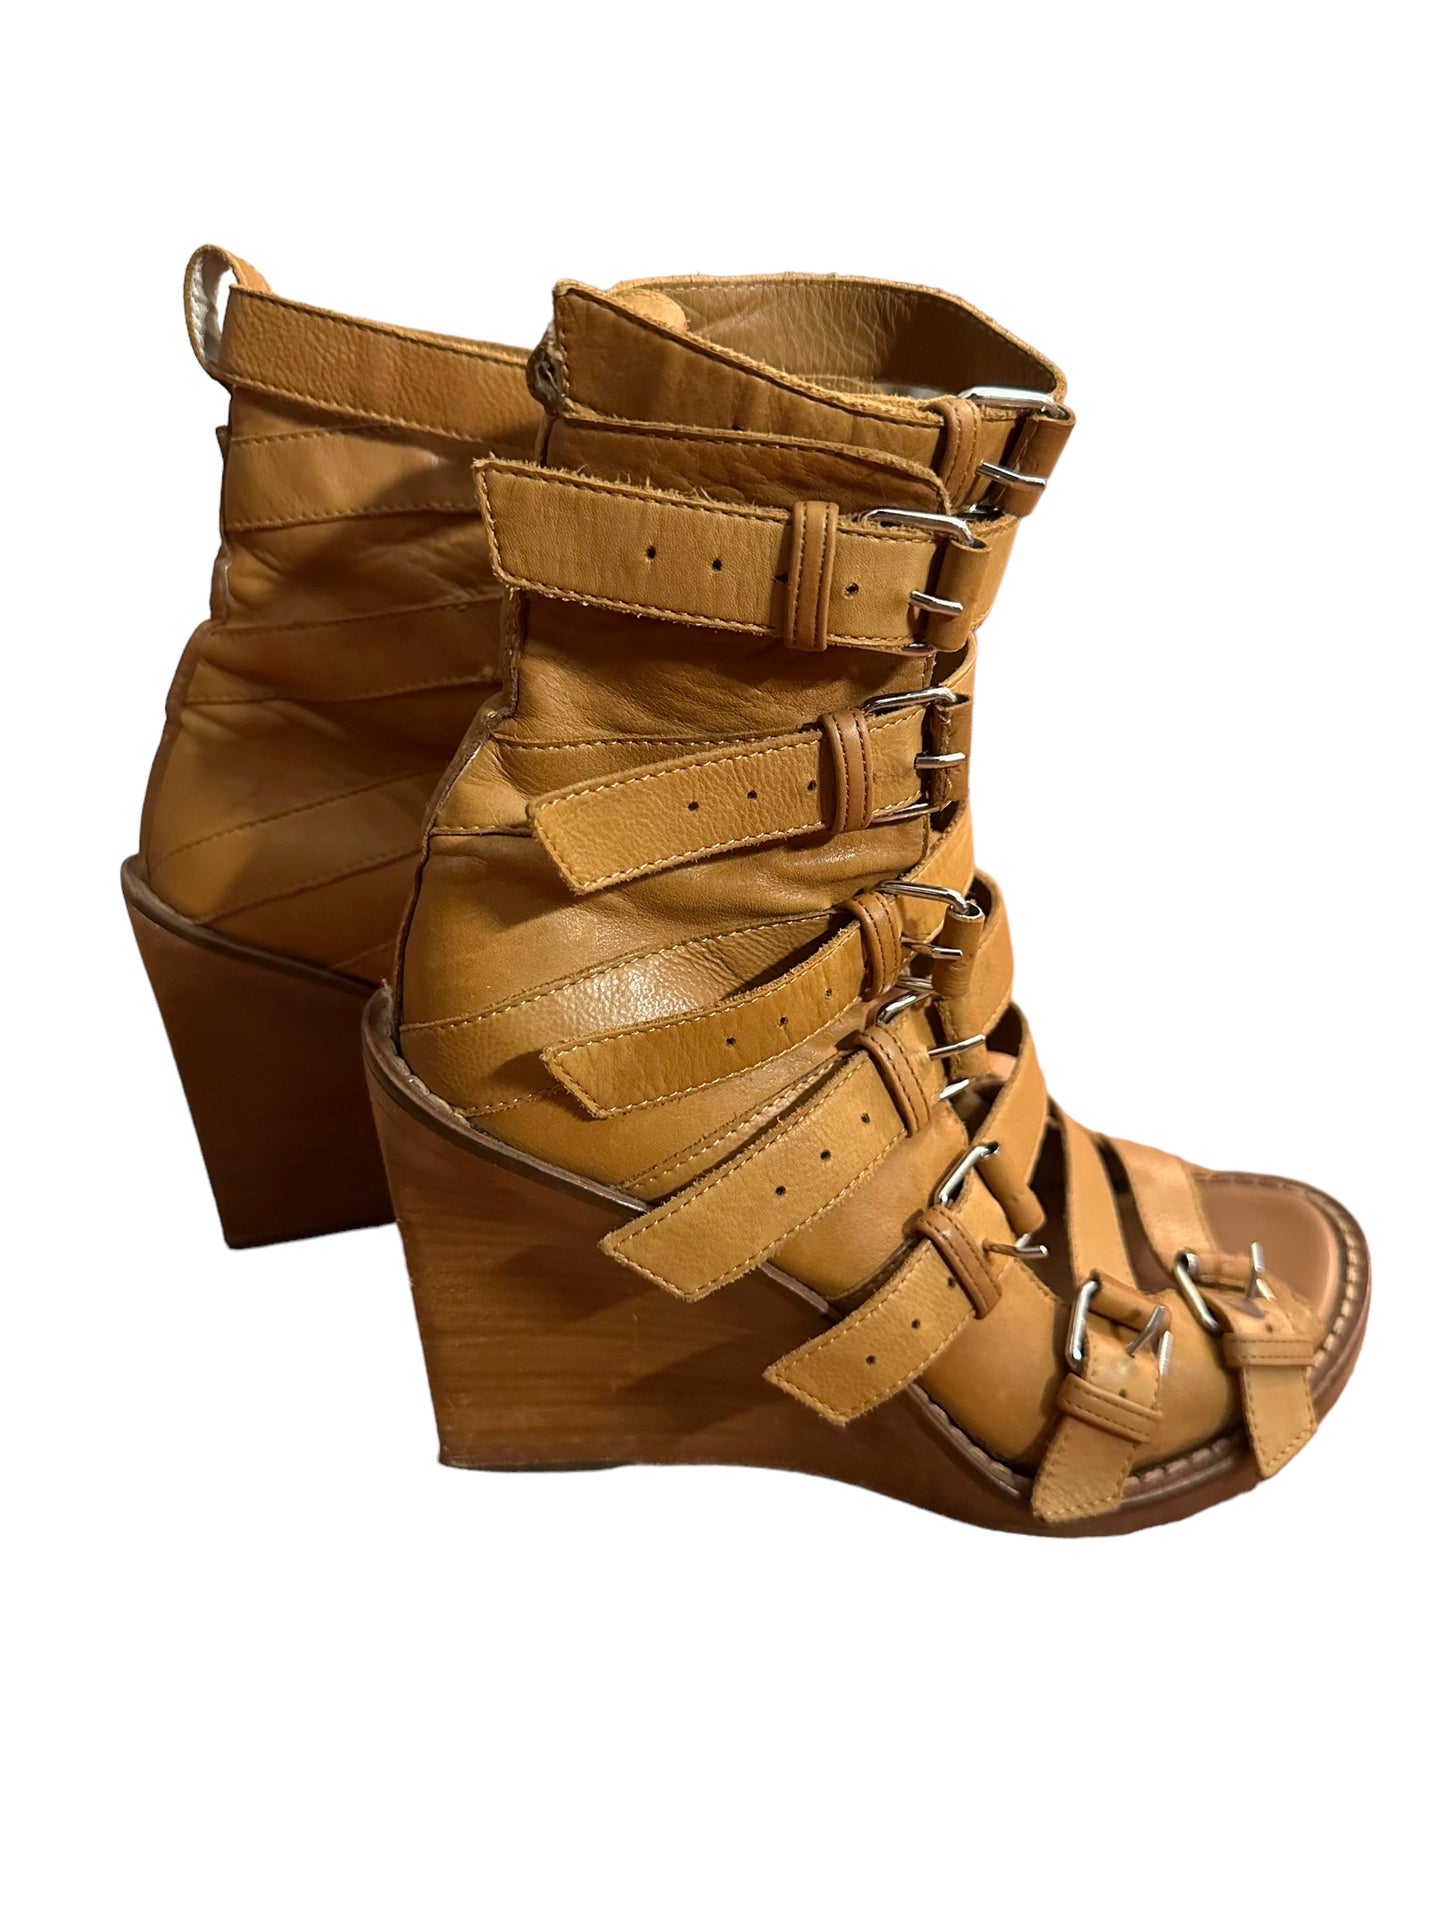 Ann Demeulemeester Camel Leather Strappy Wedges Size 37 (US 6)